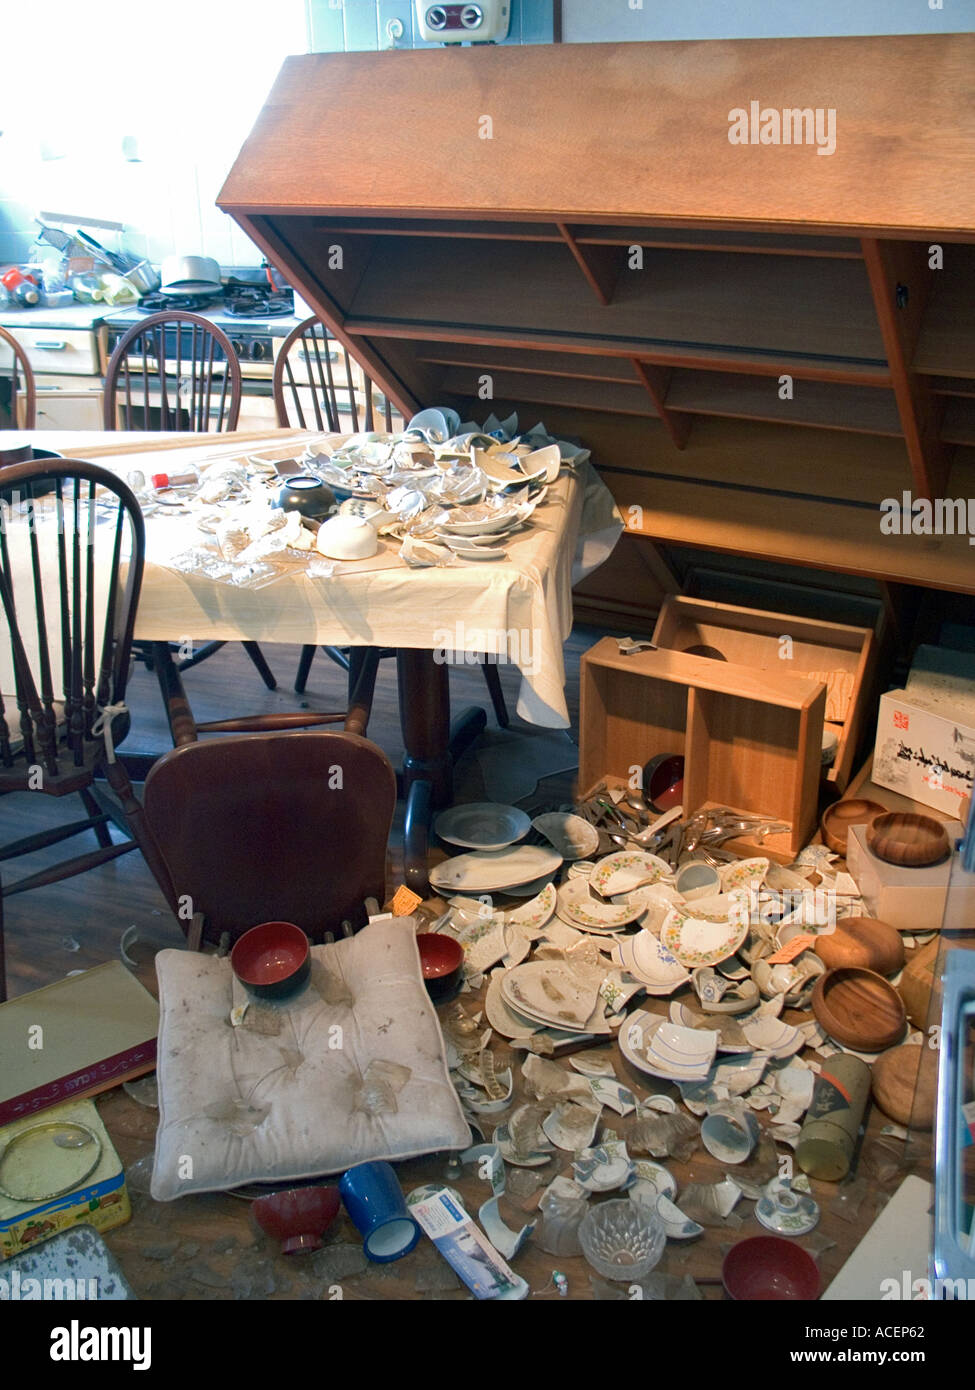 Damage to a residential kitchen from the Great Hanshin Earthquake of 1995 in and around Kobe Japan Stock Photo